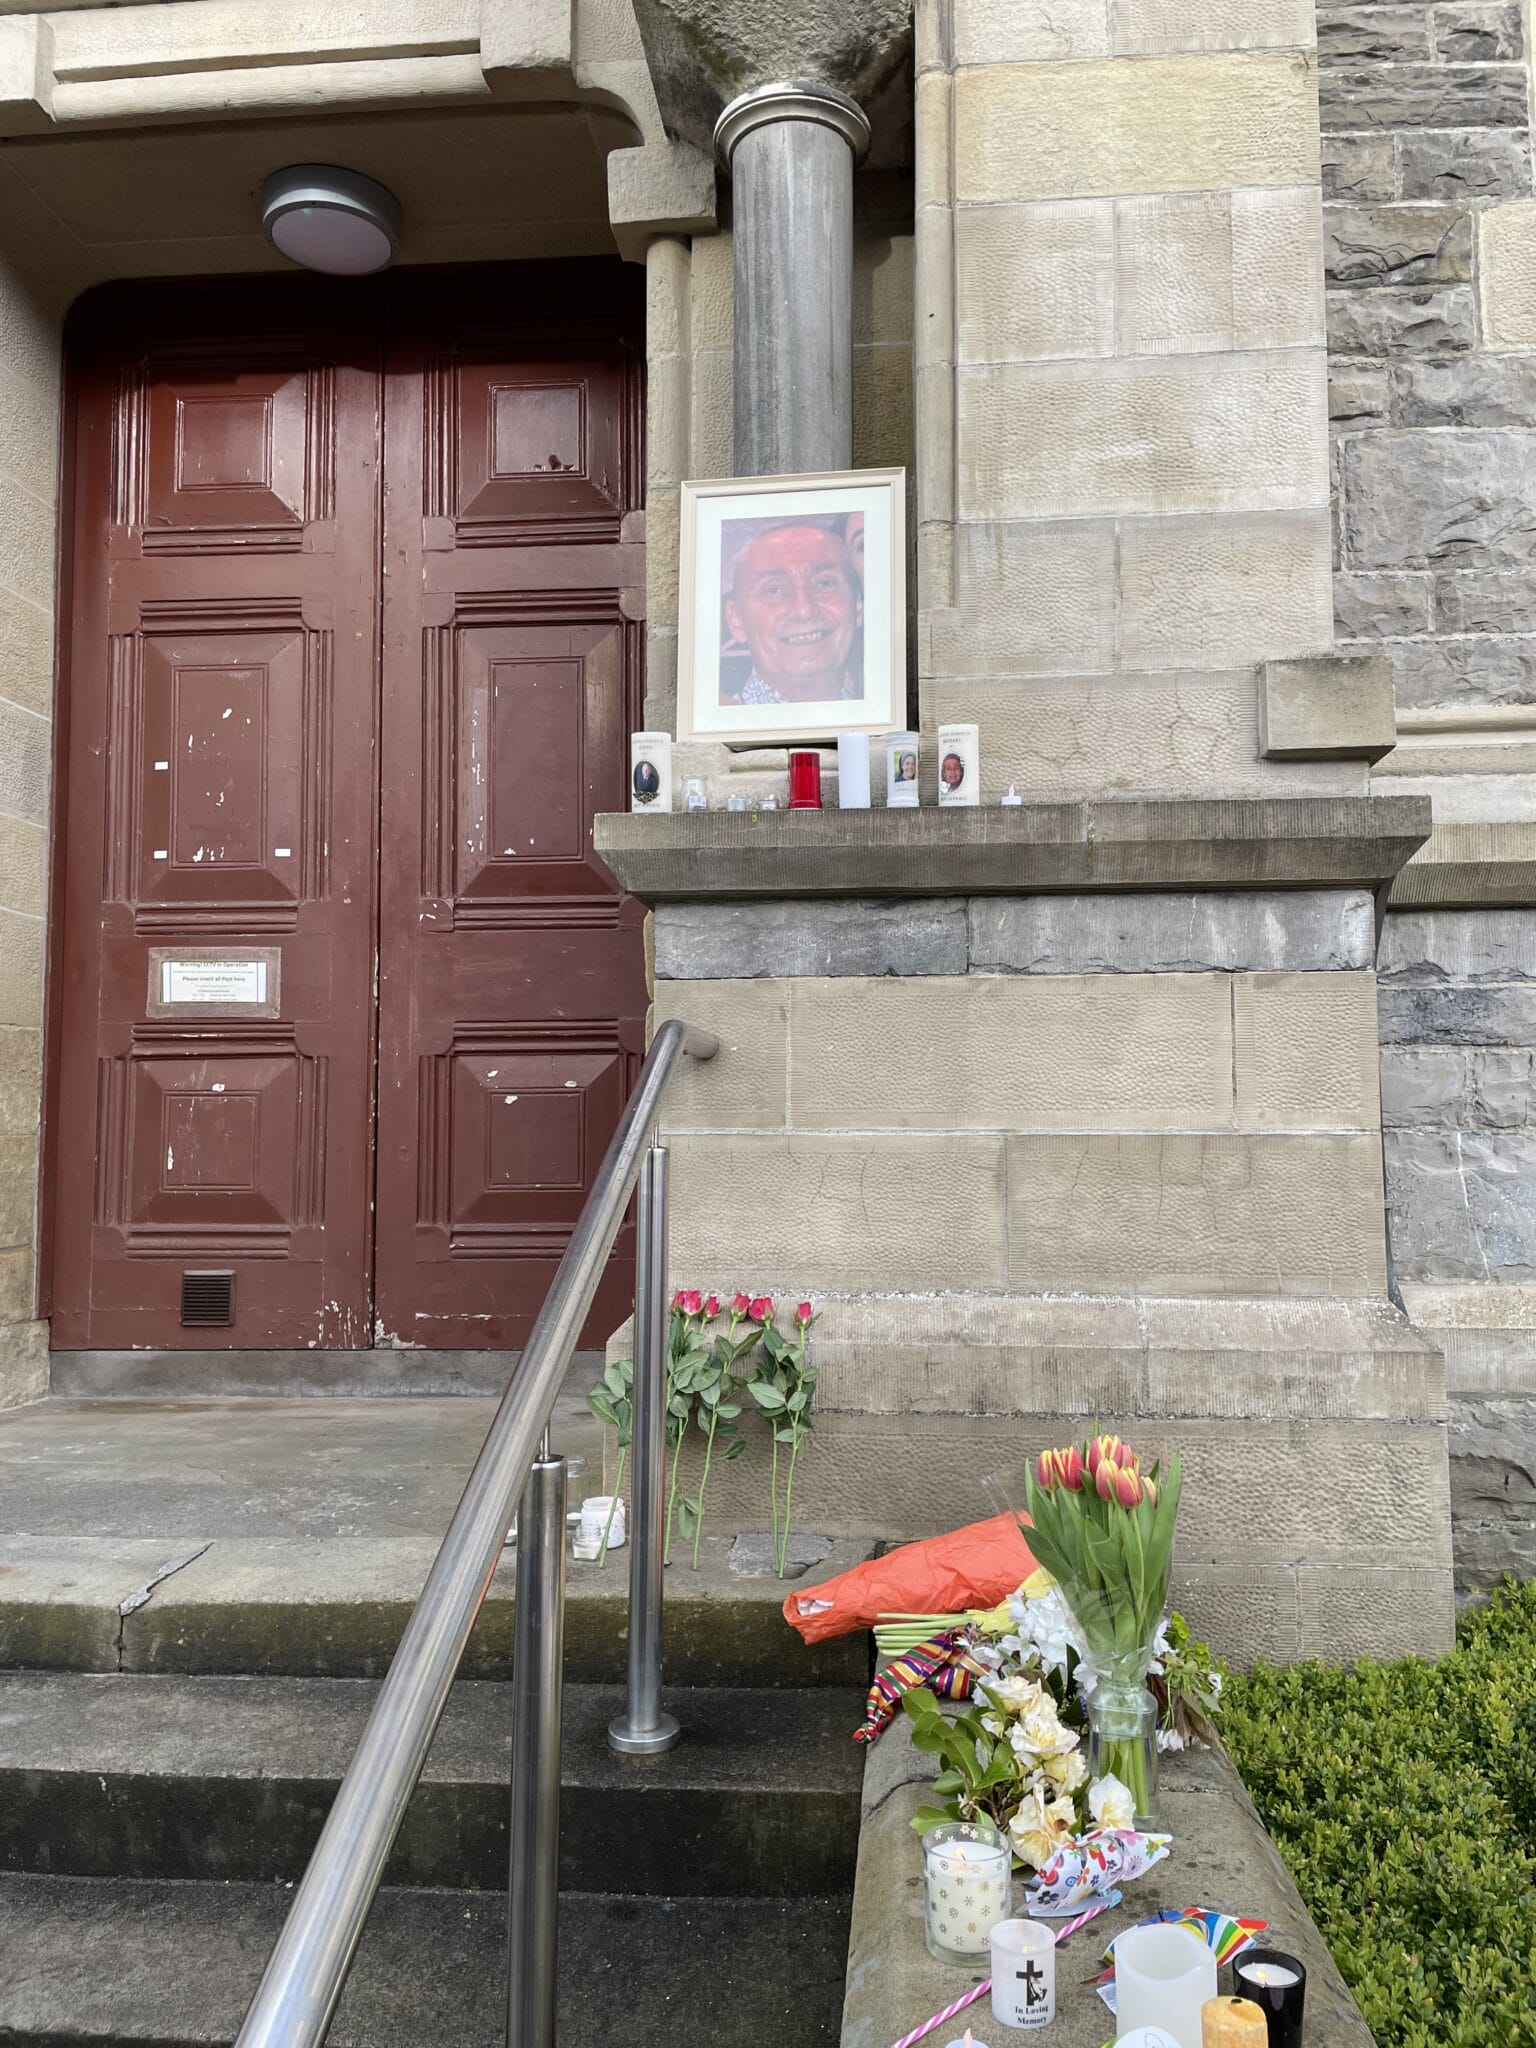 A picture of Michael Snee can be seen hanging outside the City Hall in Sligo. 